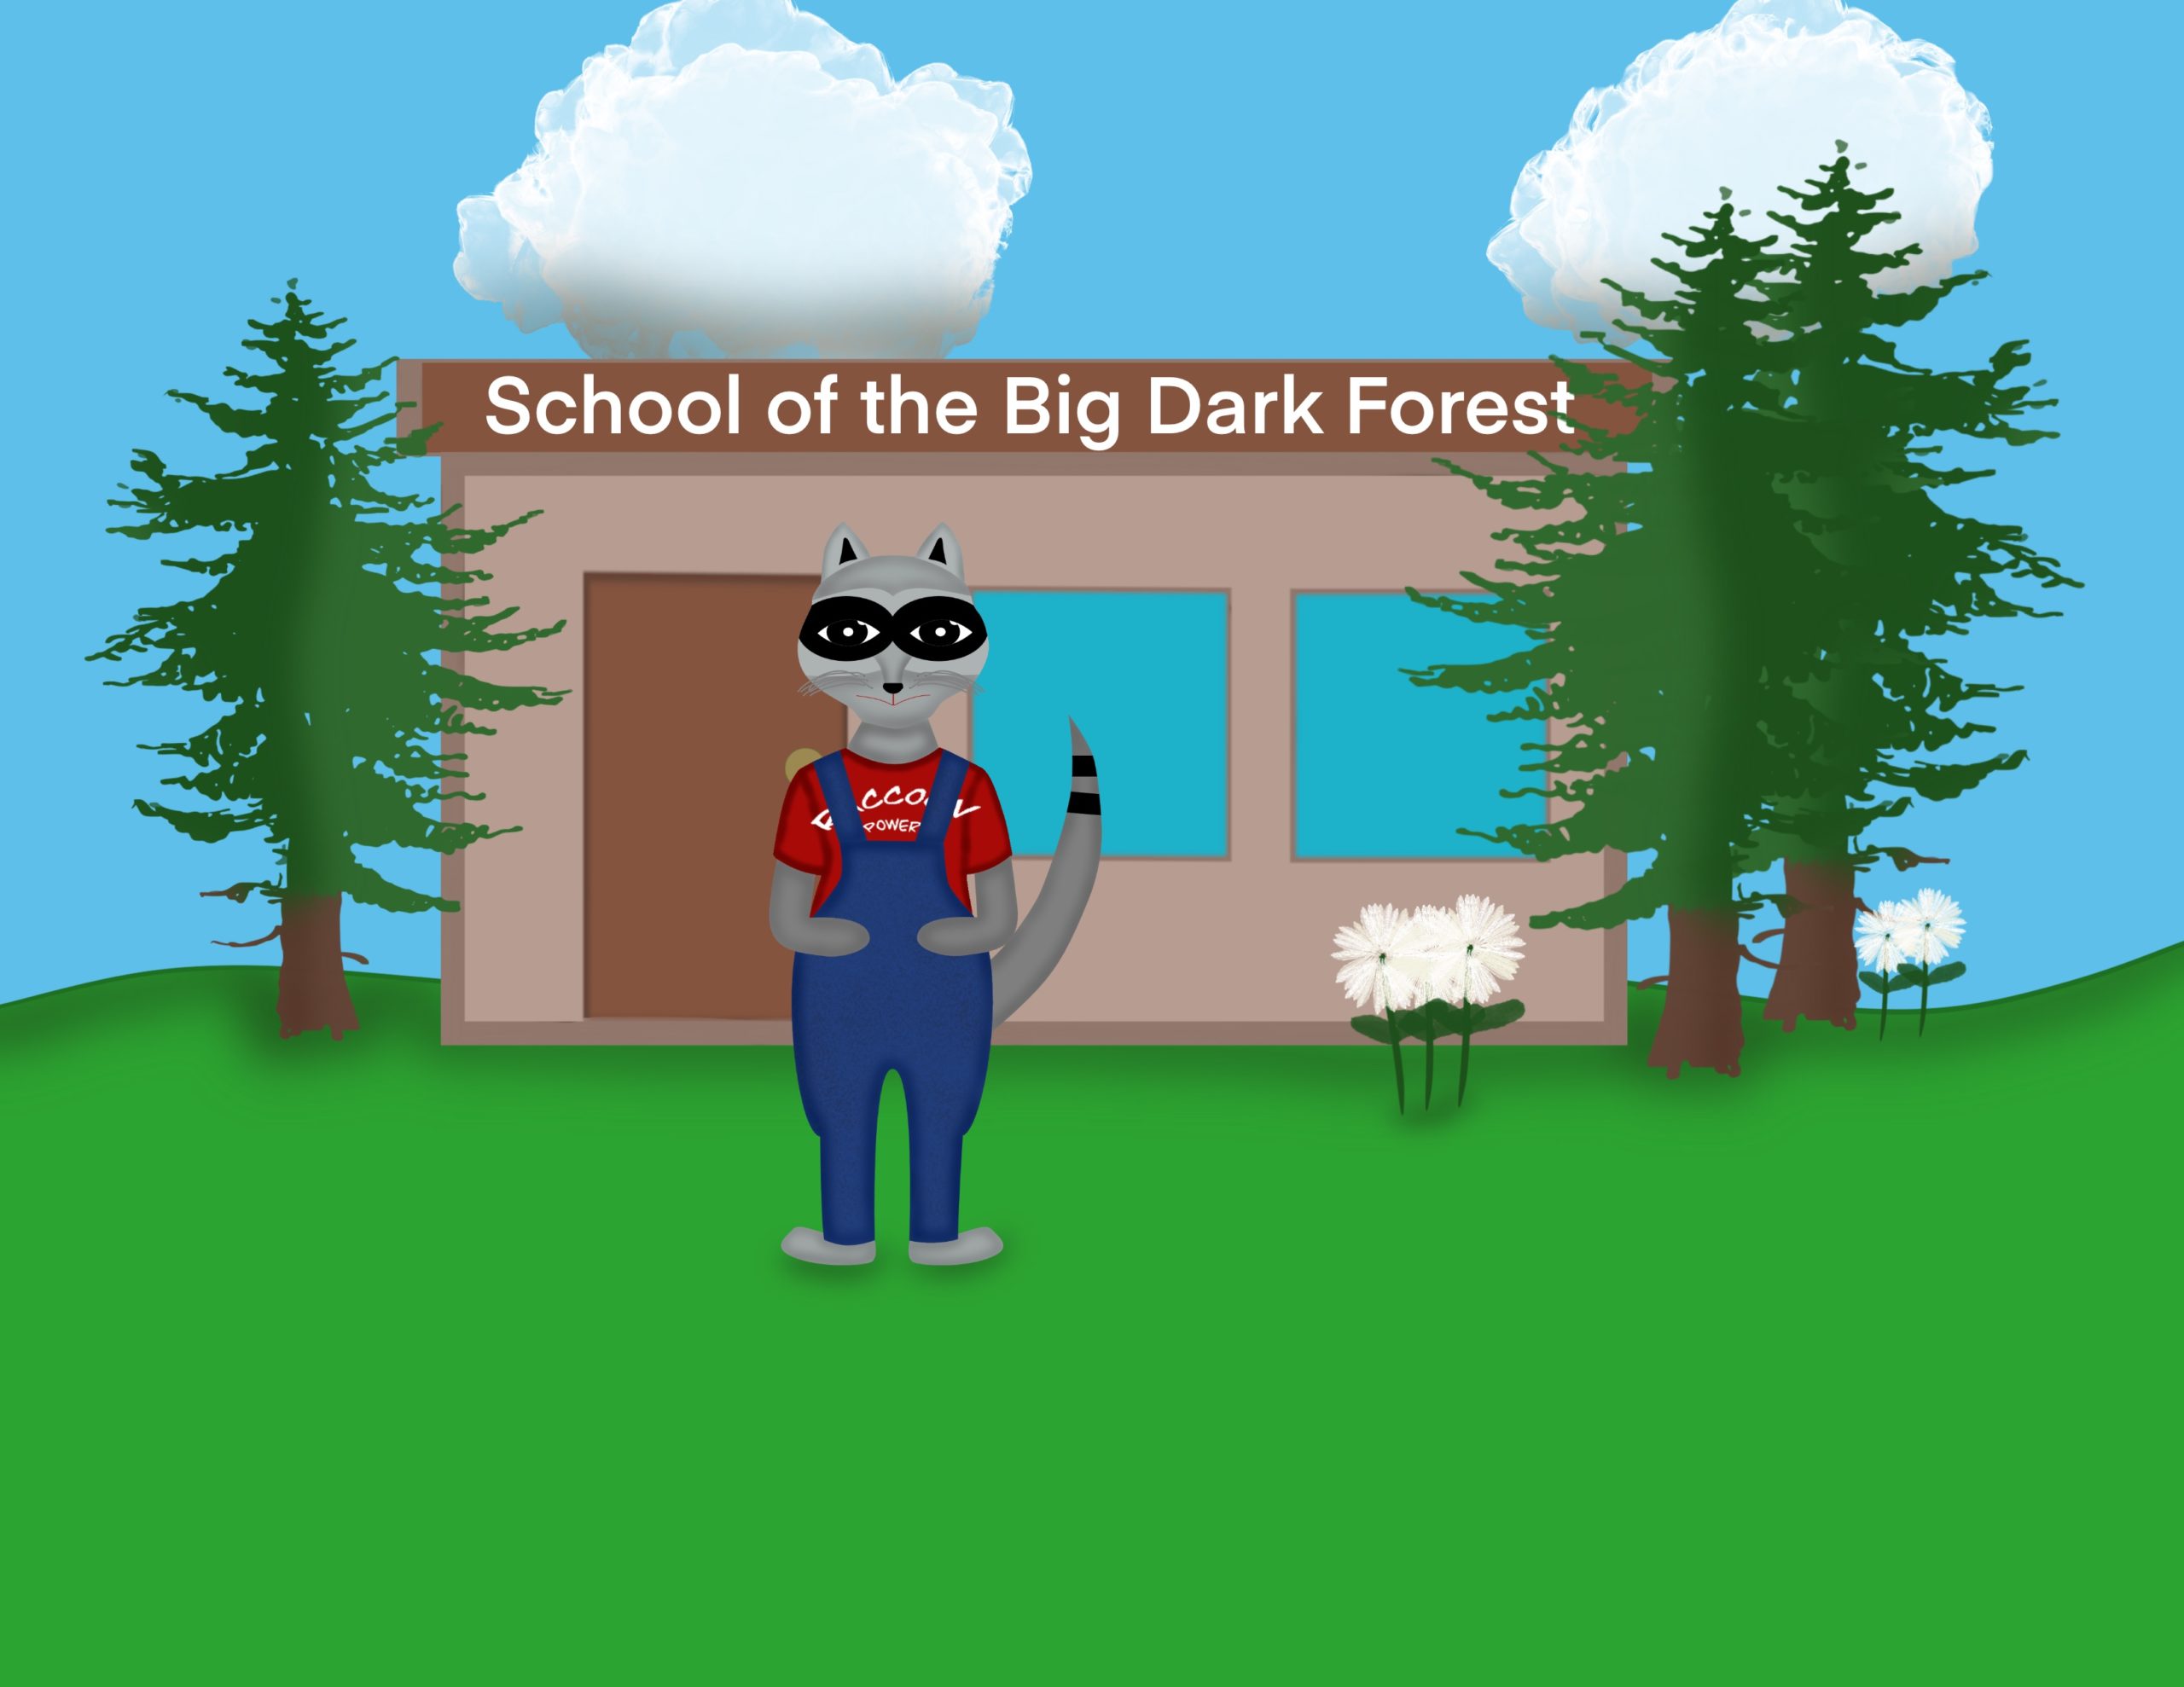 The School of the Big Dark Forest